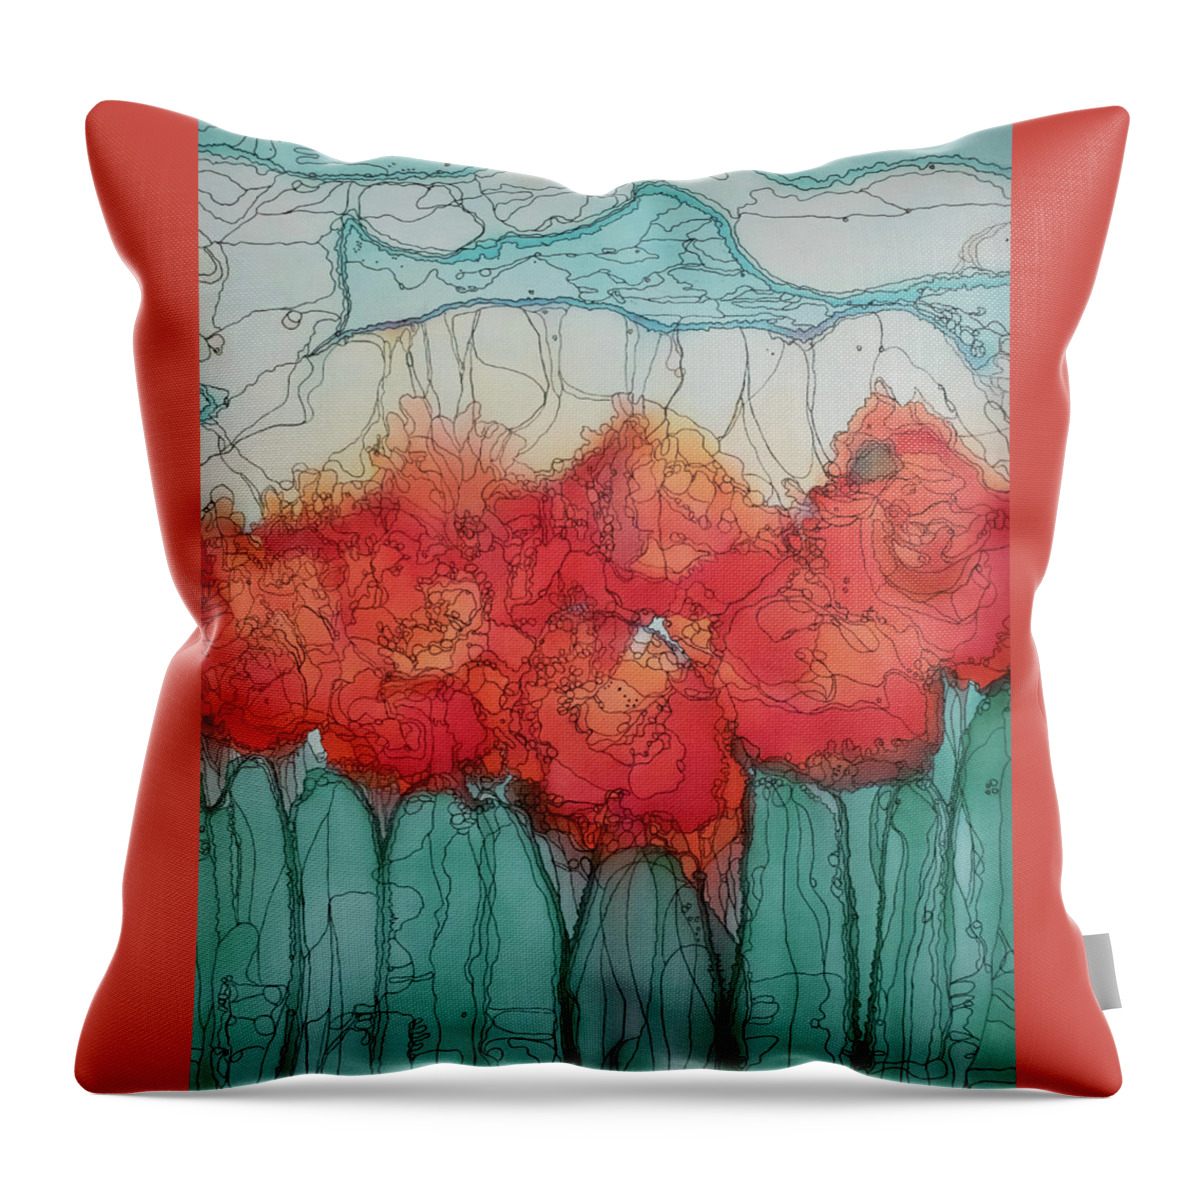 Flowers Throw Pillow featuring the mixed media Alcohol Meadow by Aimee Bruno